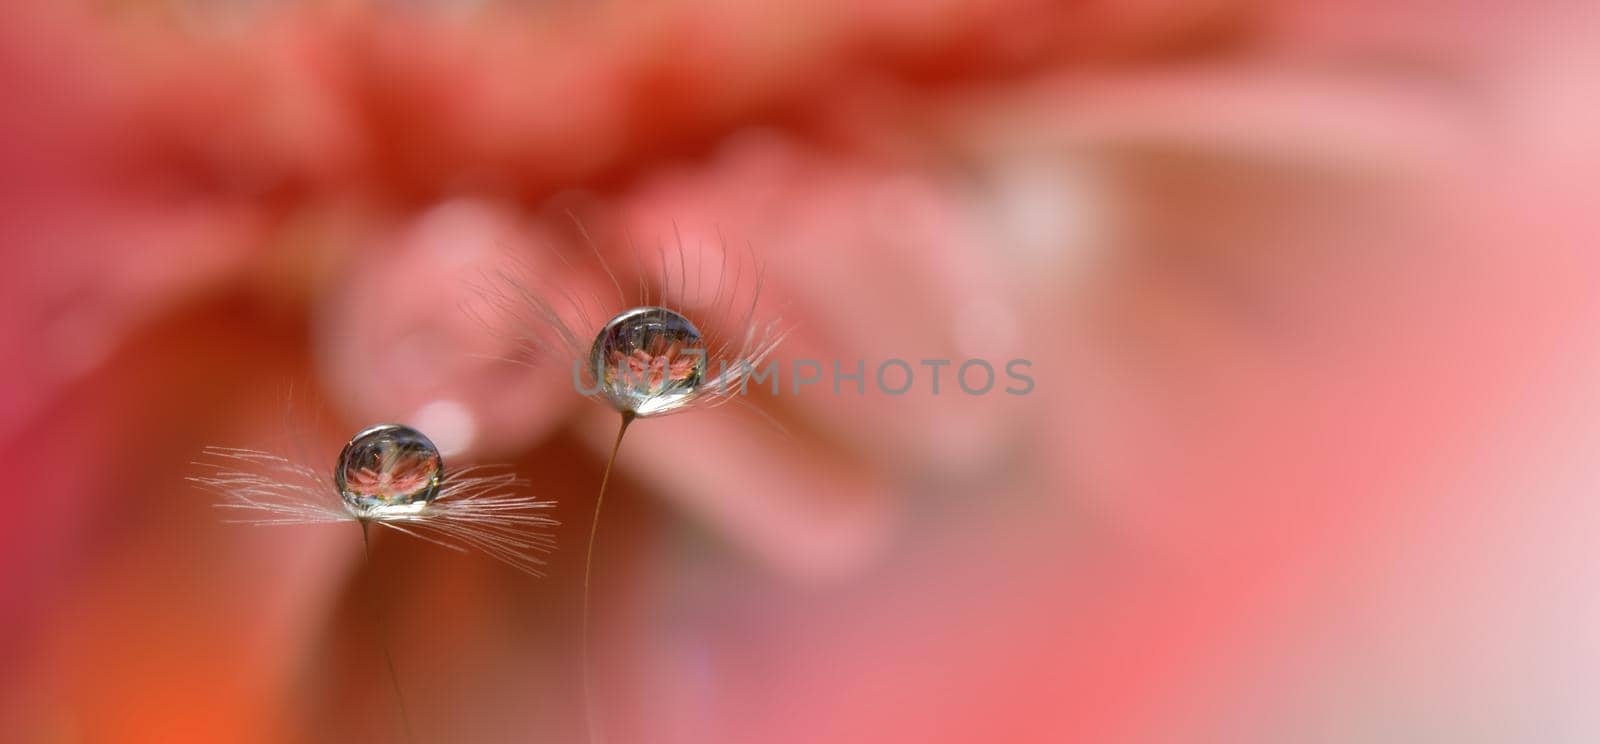 Beautiful Nature Background.Floral Art Design.Abstract Macro Photography.Pastel Flower.Dandelion Flowers.Orange Background.Creative Artistic Wallpaper.Wedding Invitation.Celebration,love.Close up View.Water Drops.Tranquil Natural Background.